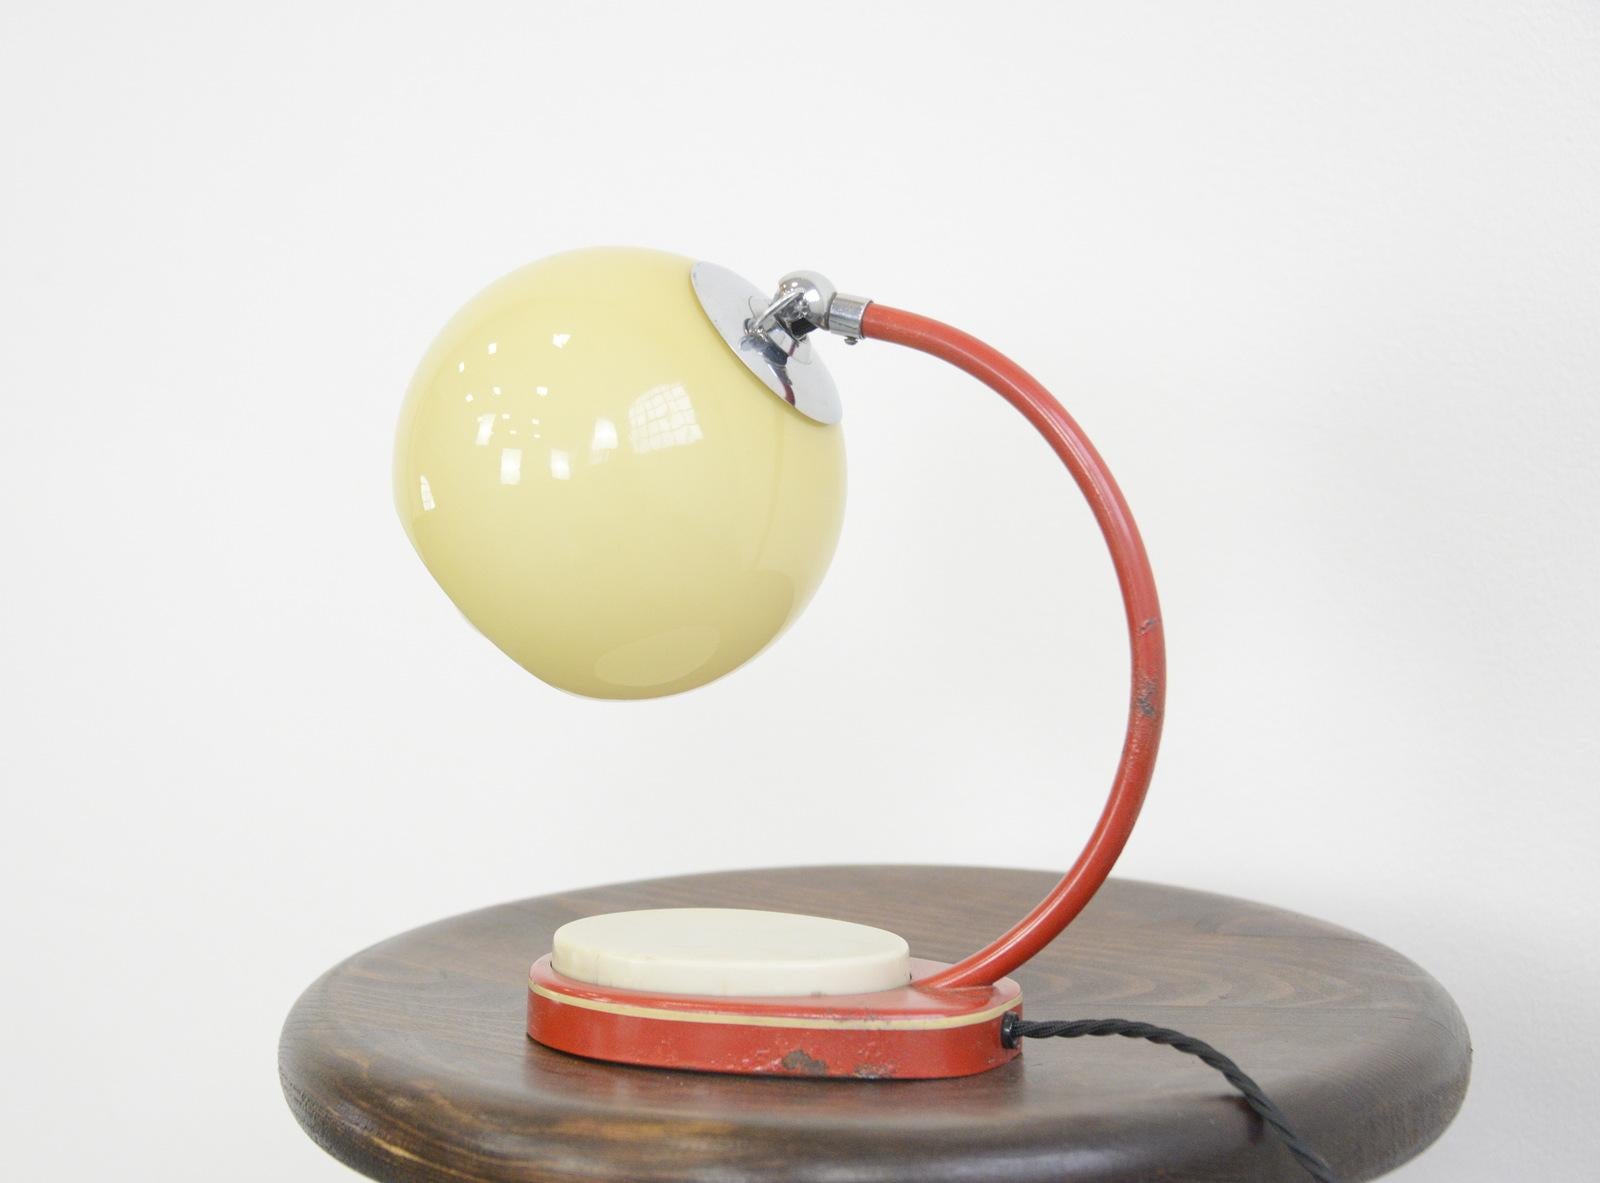 Tastlicht table lamp by Marianne Brandt for Ruppel

- Original red paint with pinstriping 
- Glass shade
- Takes E27 fitting bulbs
- Large touch switch
- Designed by Marianne Brandt for Ruppel
- German ~ 1920s
- Measures: 23cm tall x 11cm